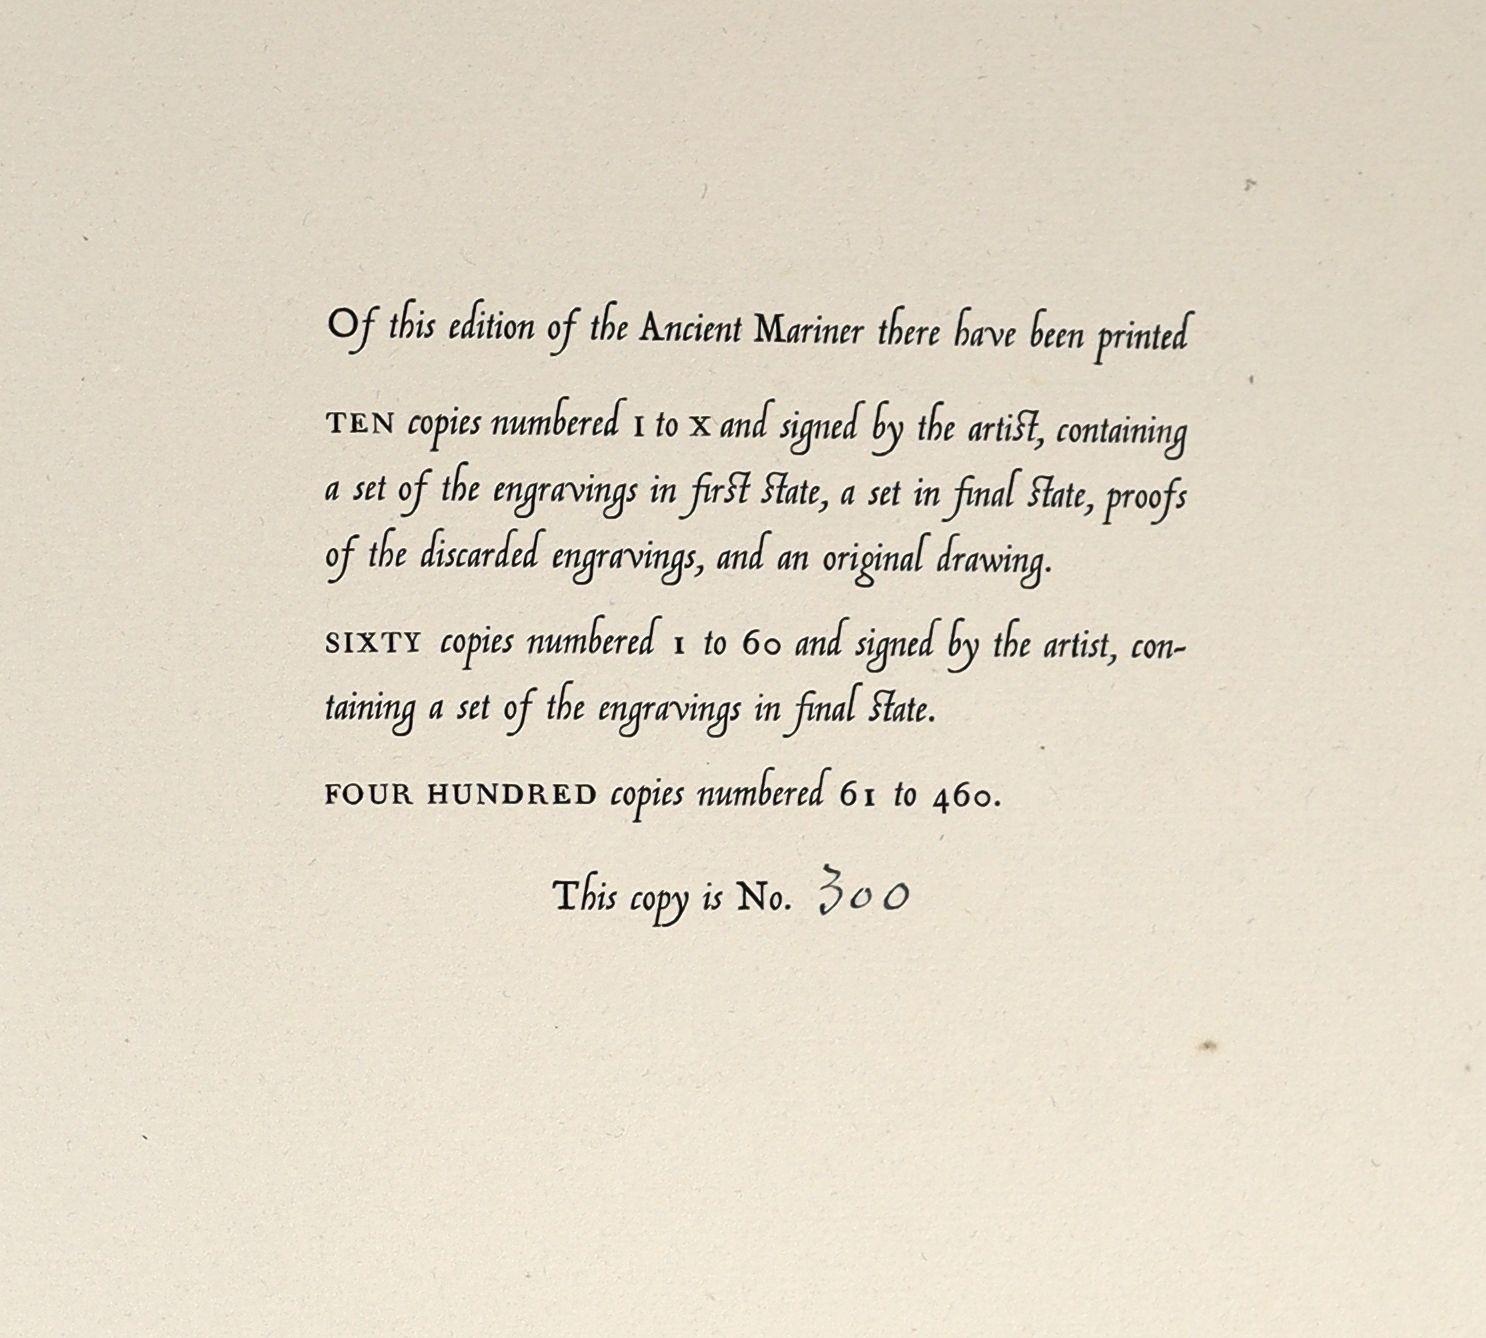 ° ° Coleridge, Samuel Taylor - The Rime of the Ancient Mariner. Limited edition, No. 300 of 400. - Image 2 of 4